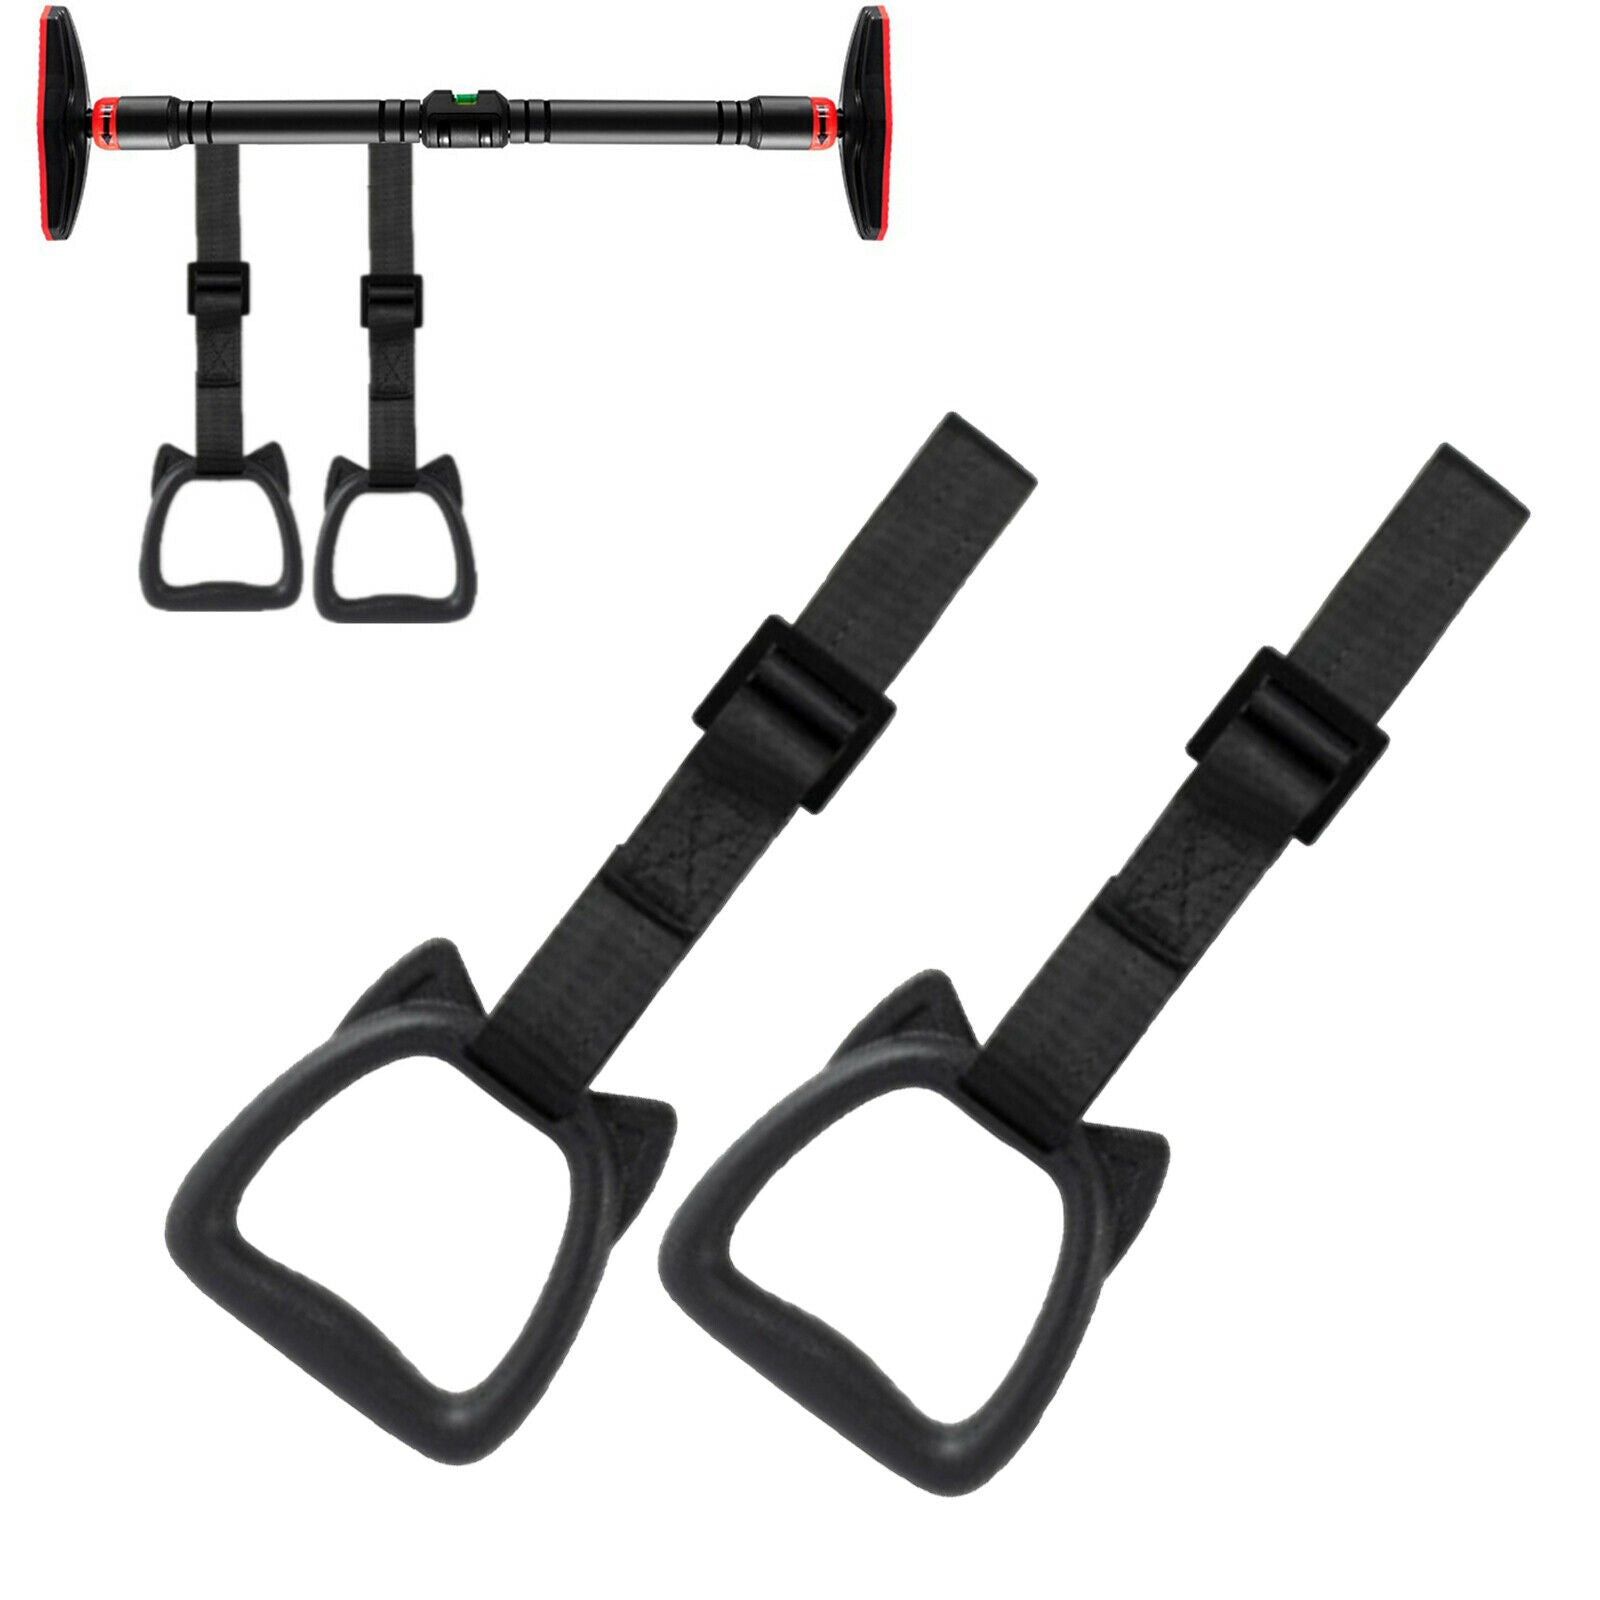 Pull-Up Gym Straps Handles for Ab Workouts Strength Trainer Bar Attachment